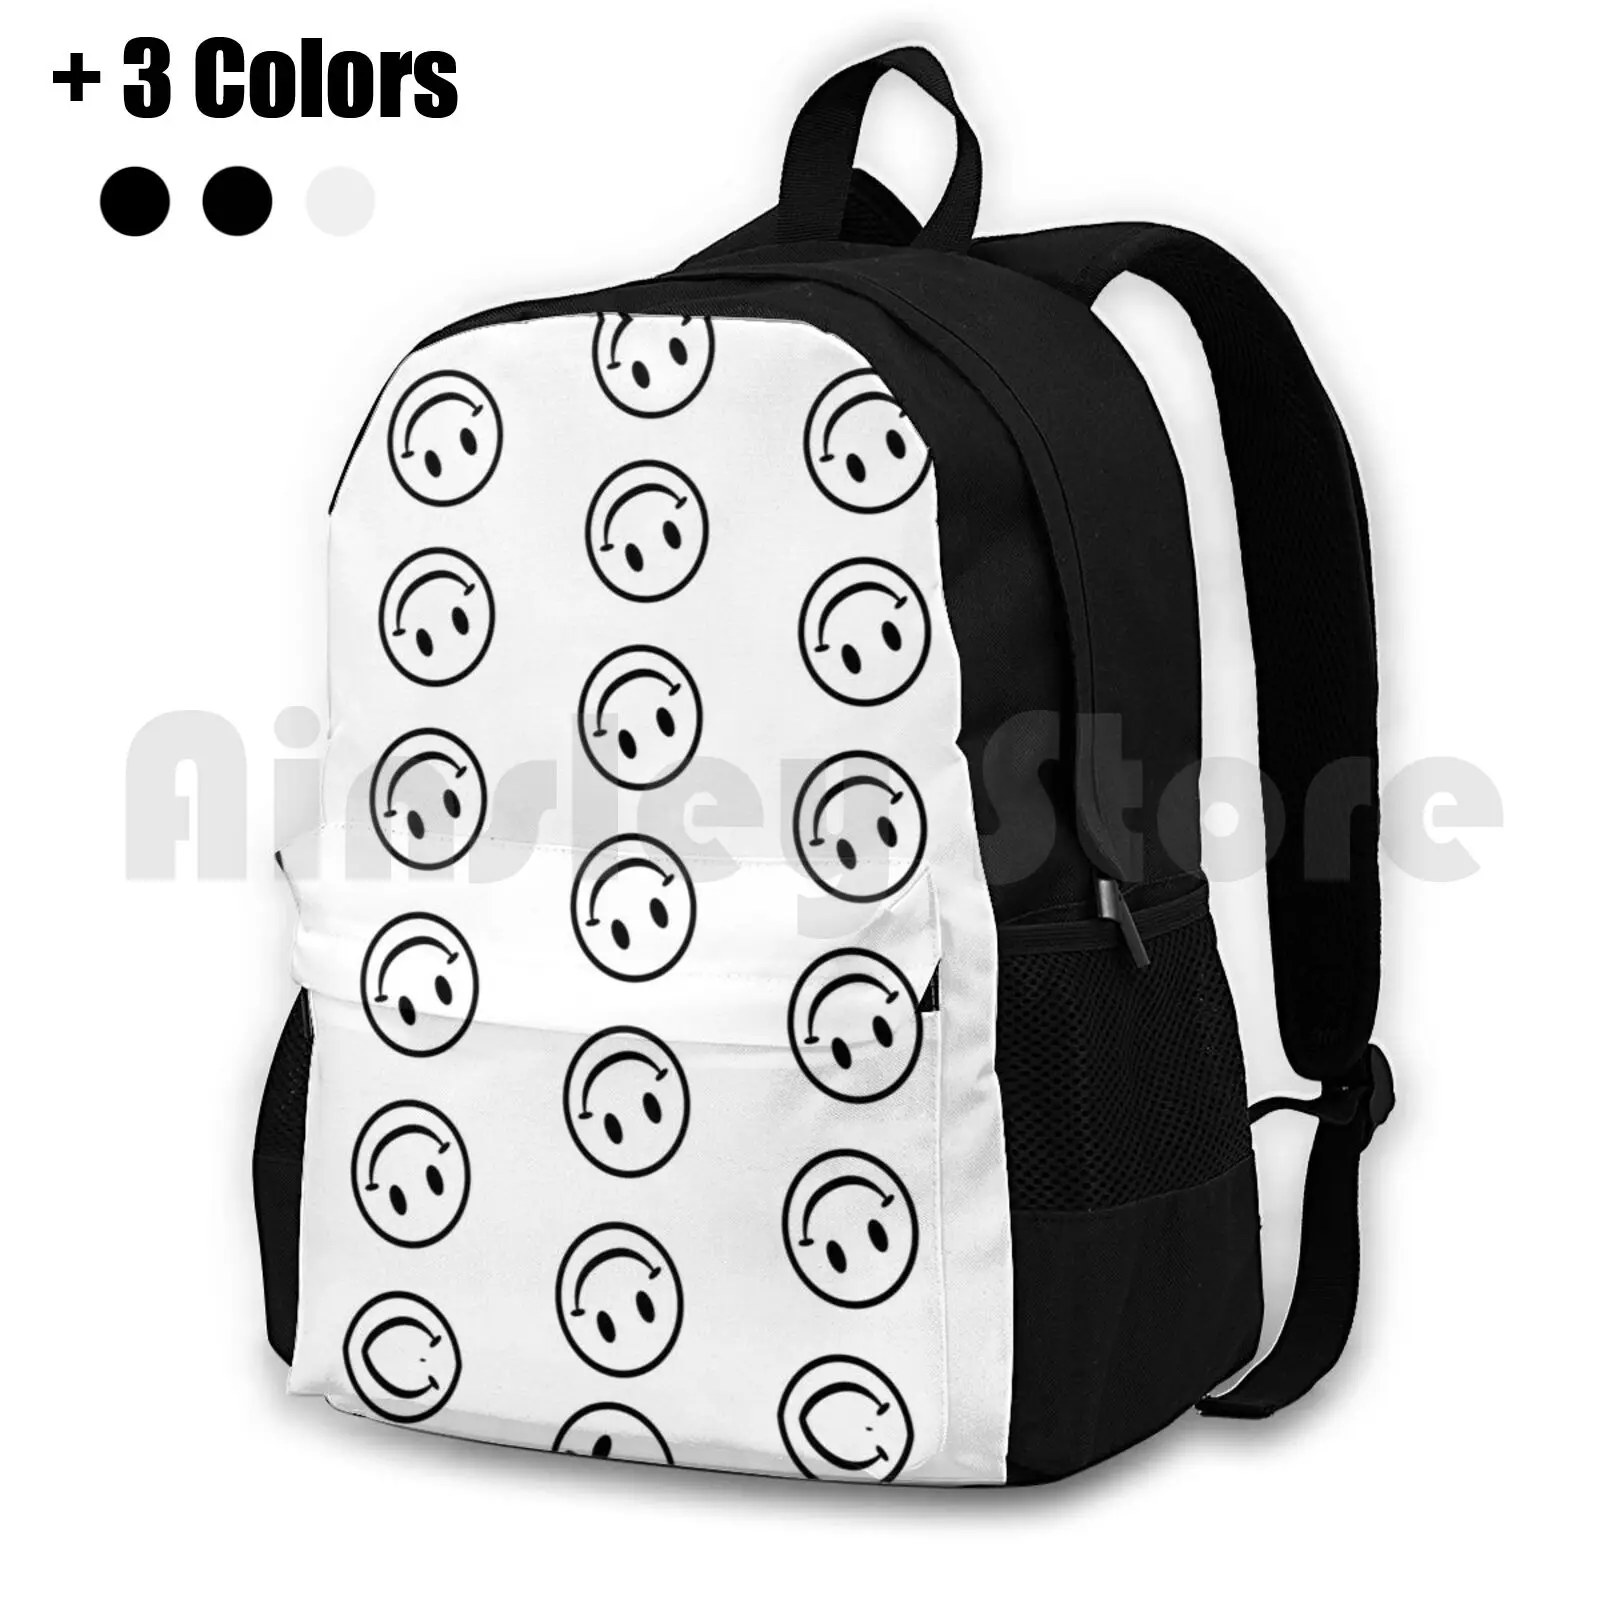 

Twisted Acid Outdoor Hiking Backpack Waterproof Camping Travel Acid 808 909 303 Rave House Music Dj Music Dance Techno